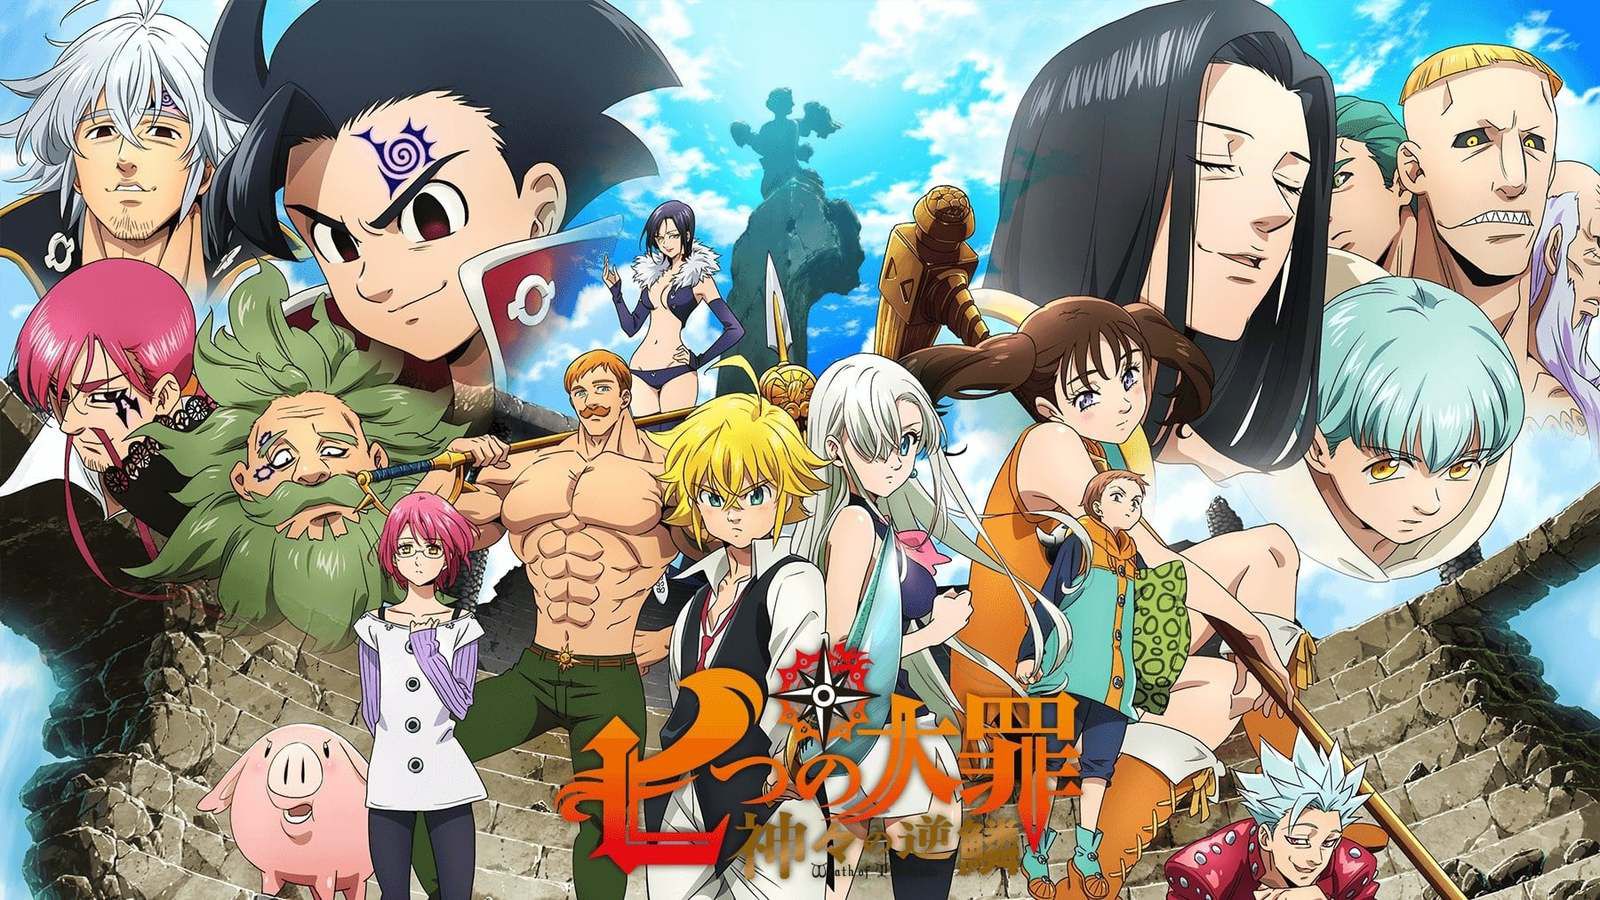 A Huge Mess. “The Seven Deadly Sins” Season 4 “Wrath of the Gods” 2020 Netflix Anime Series English Dub Review